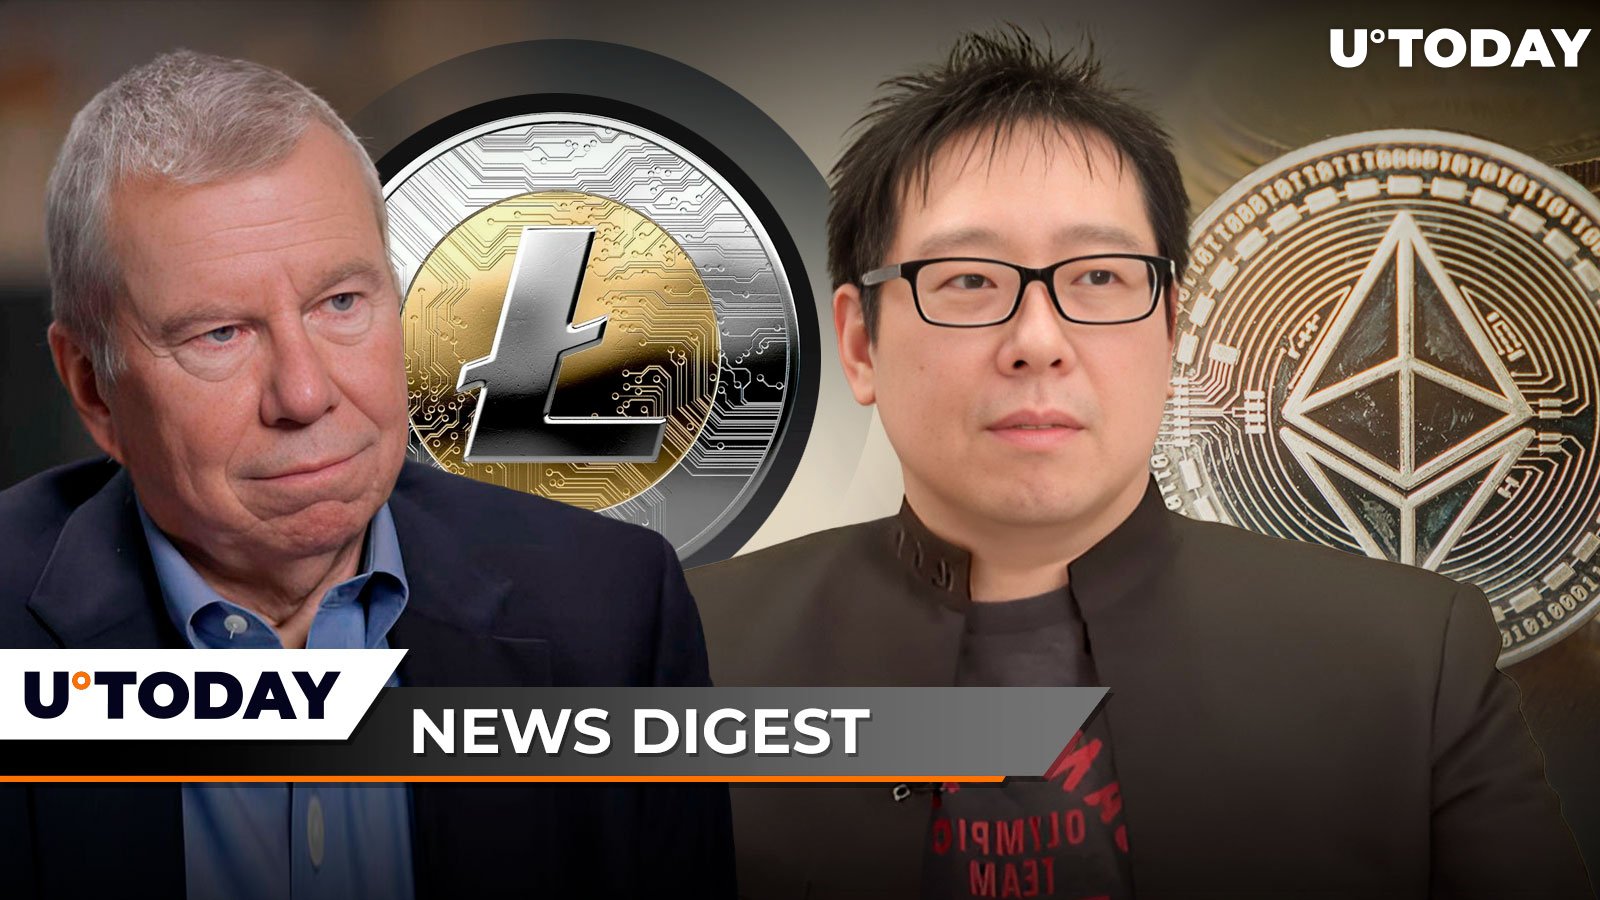 John Bollinger Issues Positive Litecoin Price Prediction, Samson Mow Slams ETH Ahead of Ethereum ETF Launch, SHIB Burn Rate Spikes 482%: Crypto News Digest by U.Today